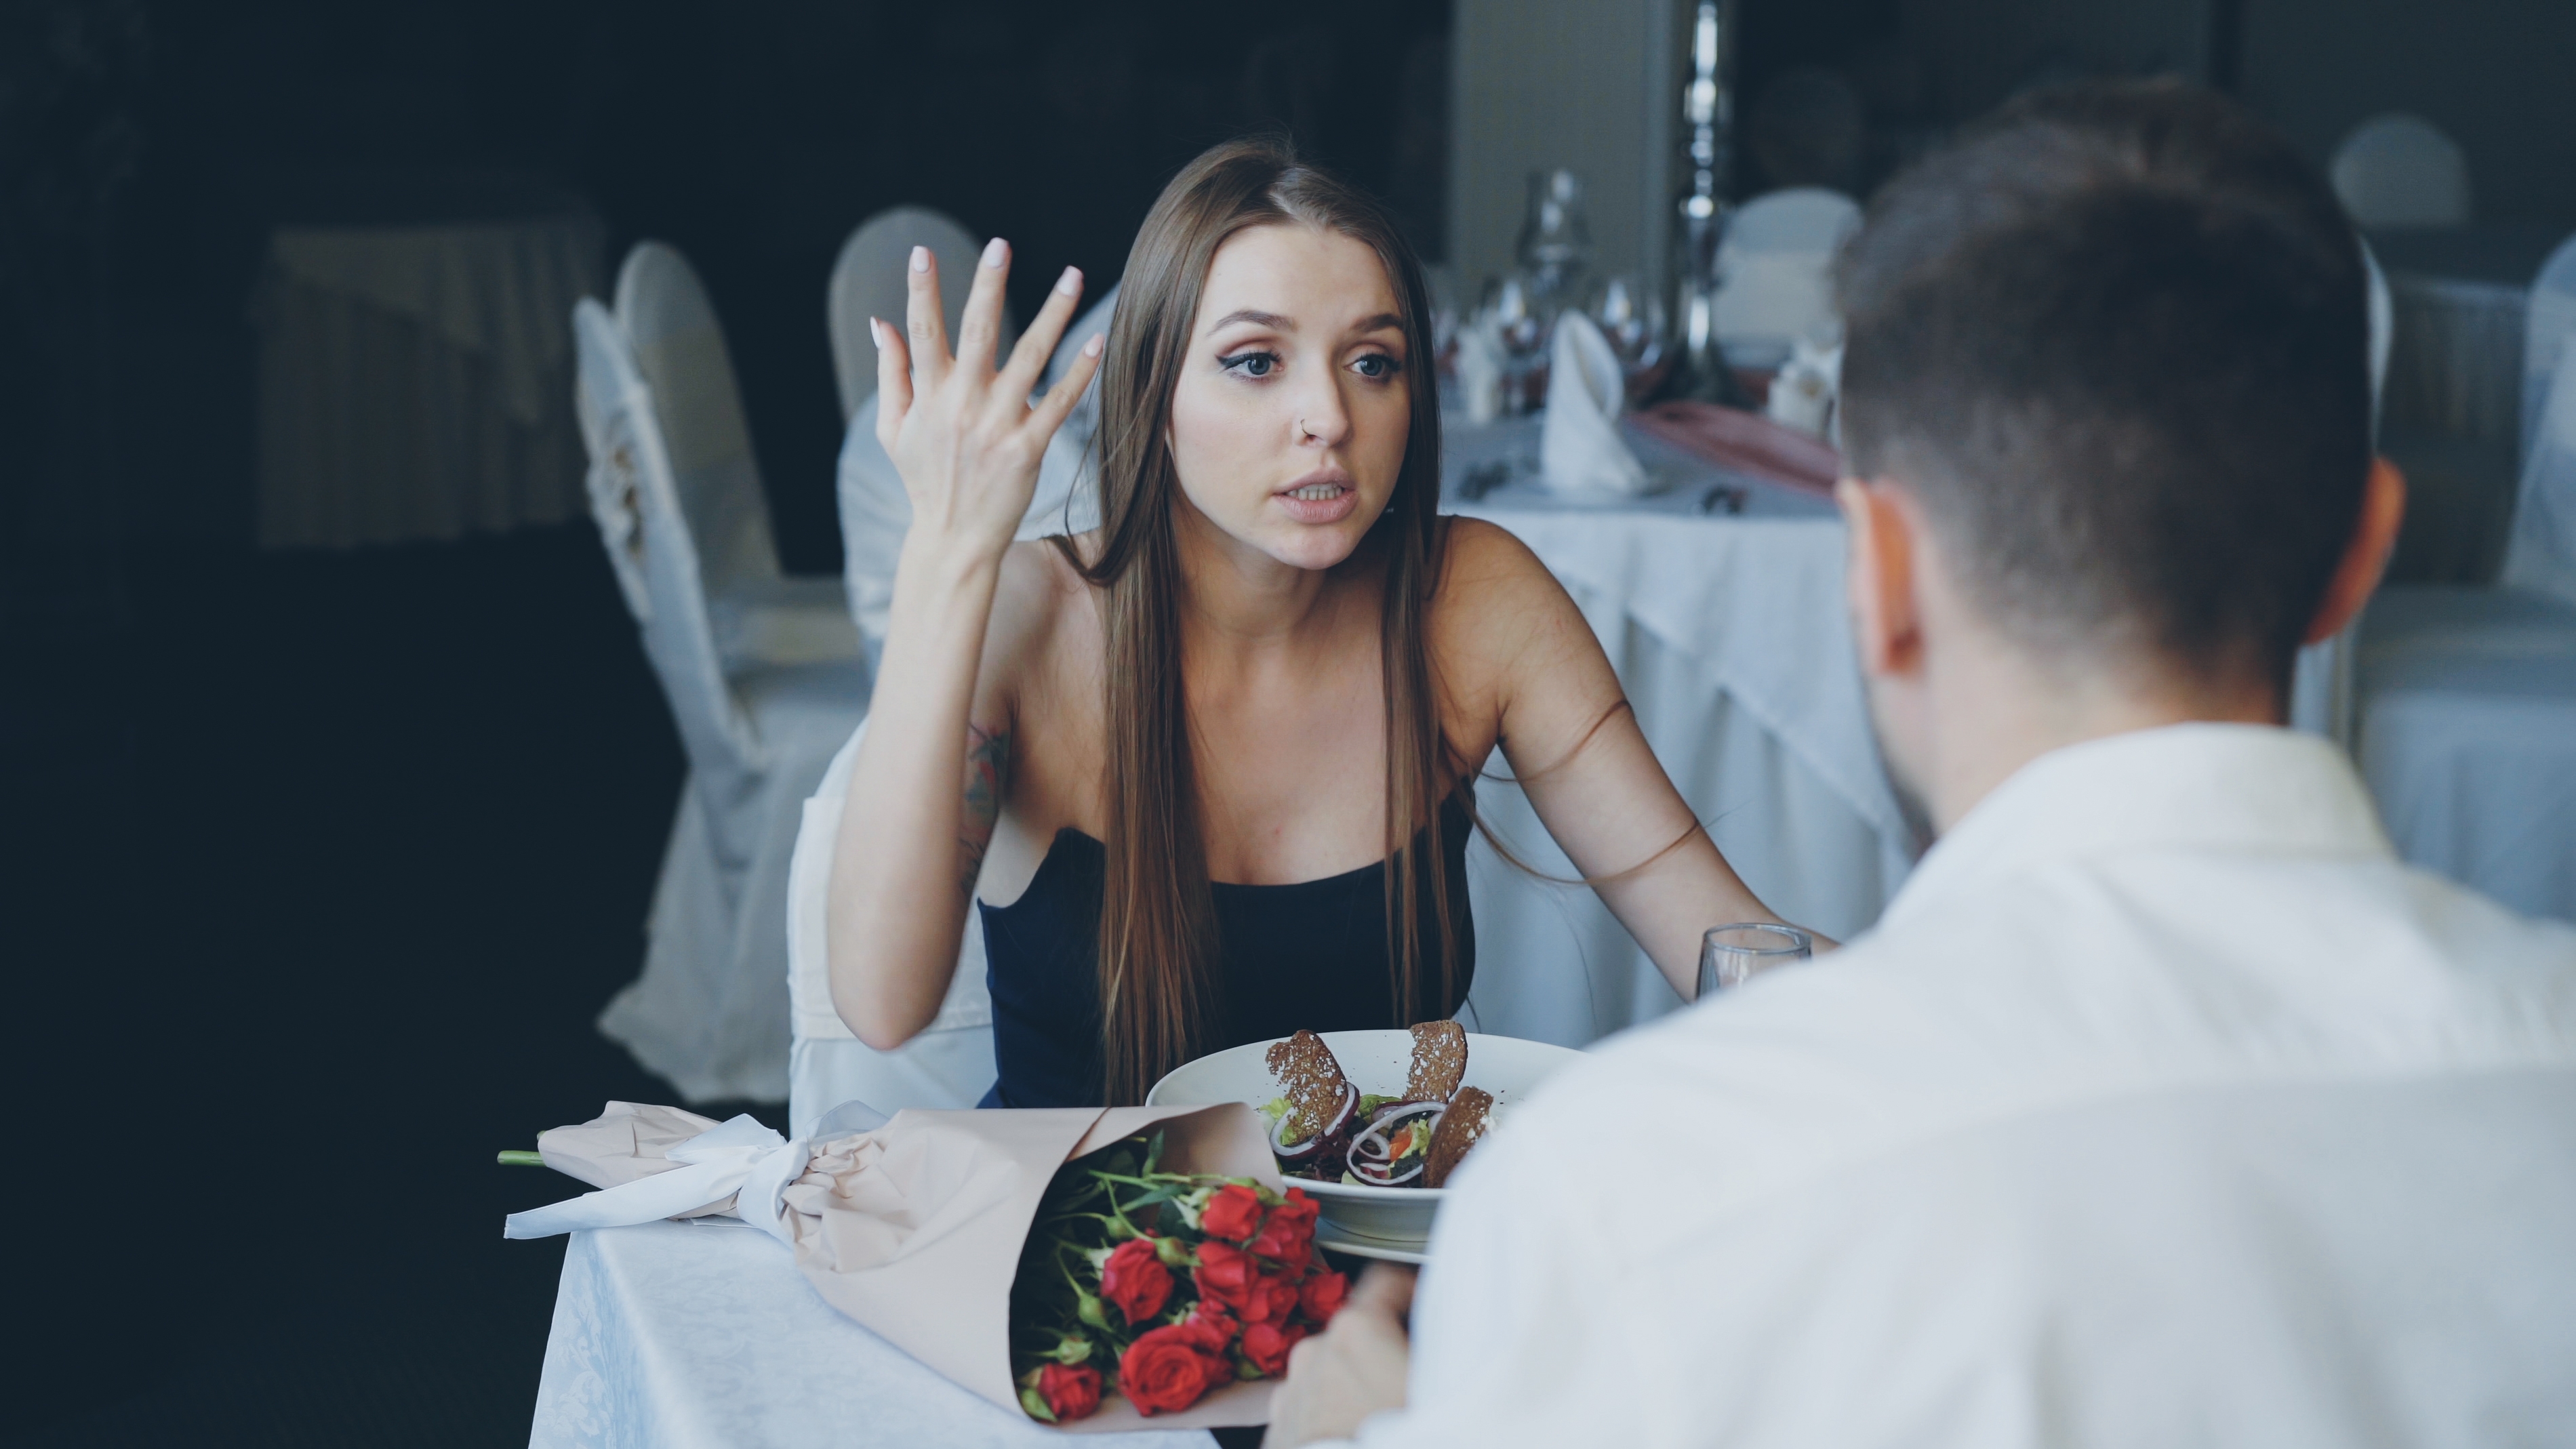 A couple arguing on a dinner date | Source: Shutterstock